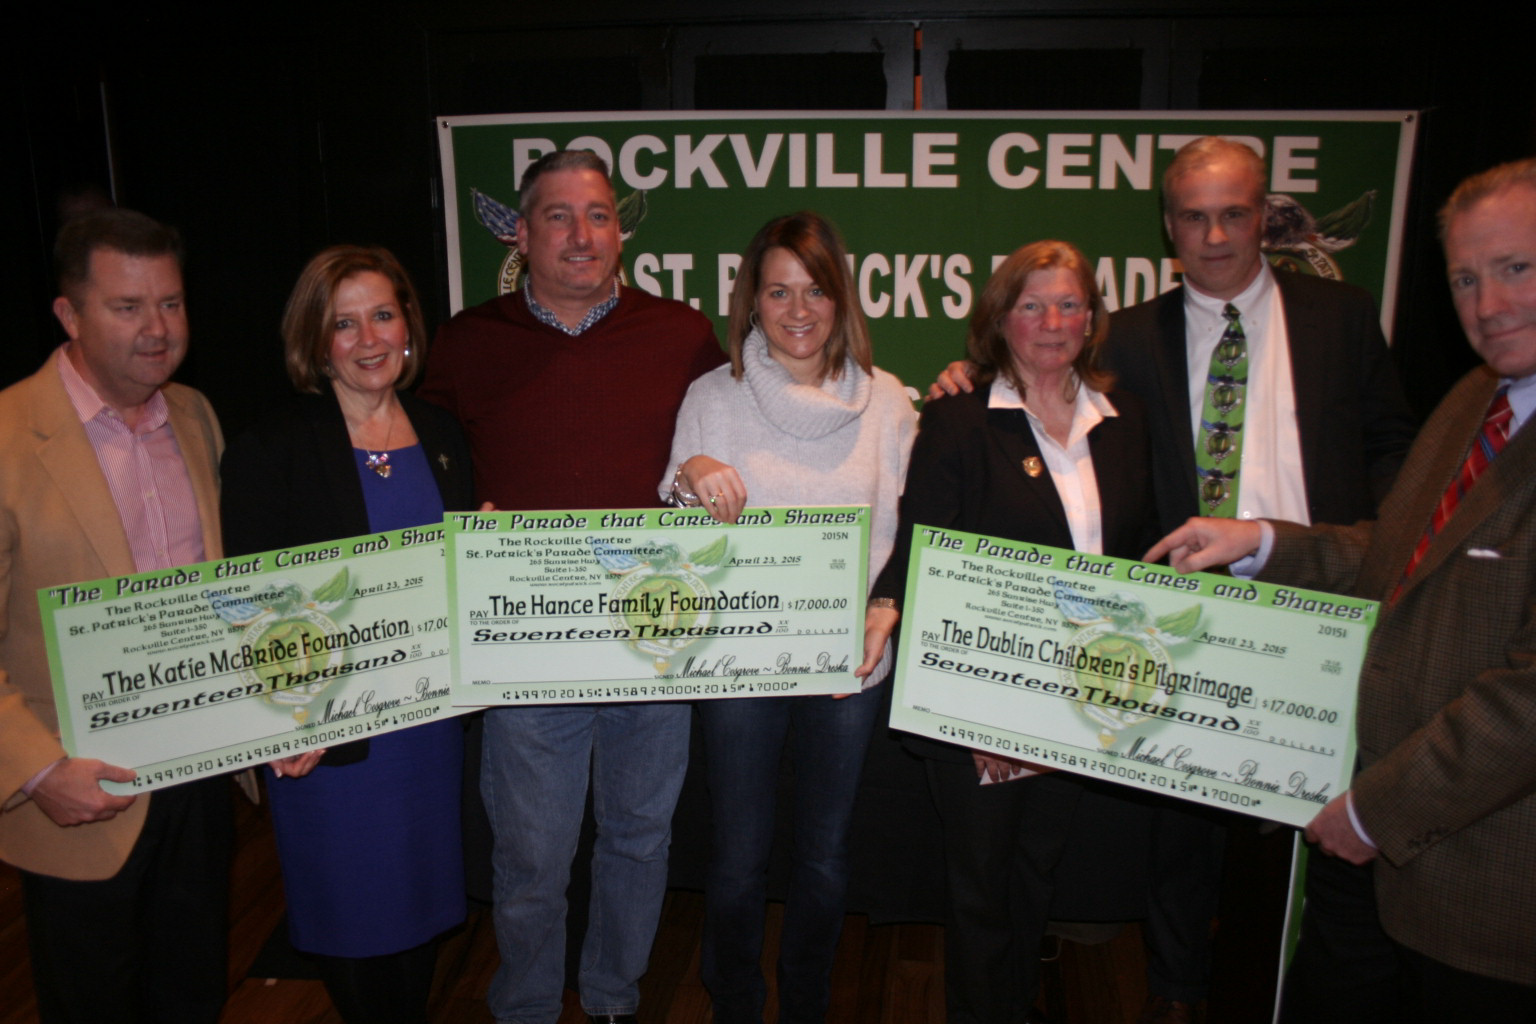 Mike and Jean McBride, left, Warren and Jackie Hance, Parade Committee Vice President Bonnie Dreska and President Mike Cosgrove and Niall Gunn with the $17,000 checks charities received from the St. Patrick’s Day Parade Committee.